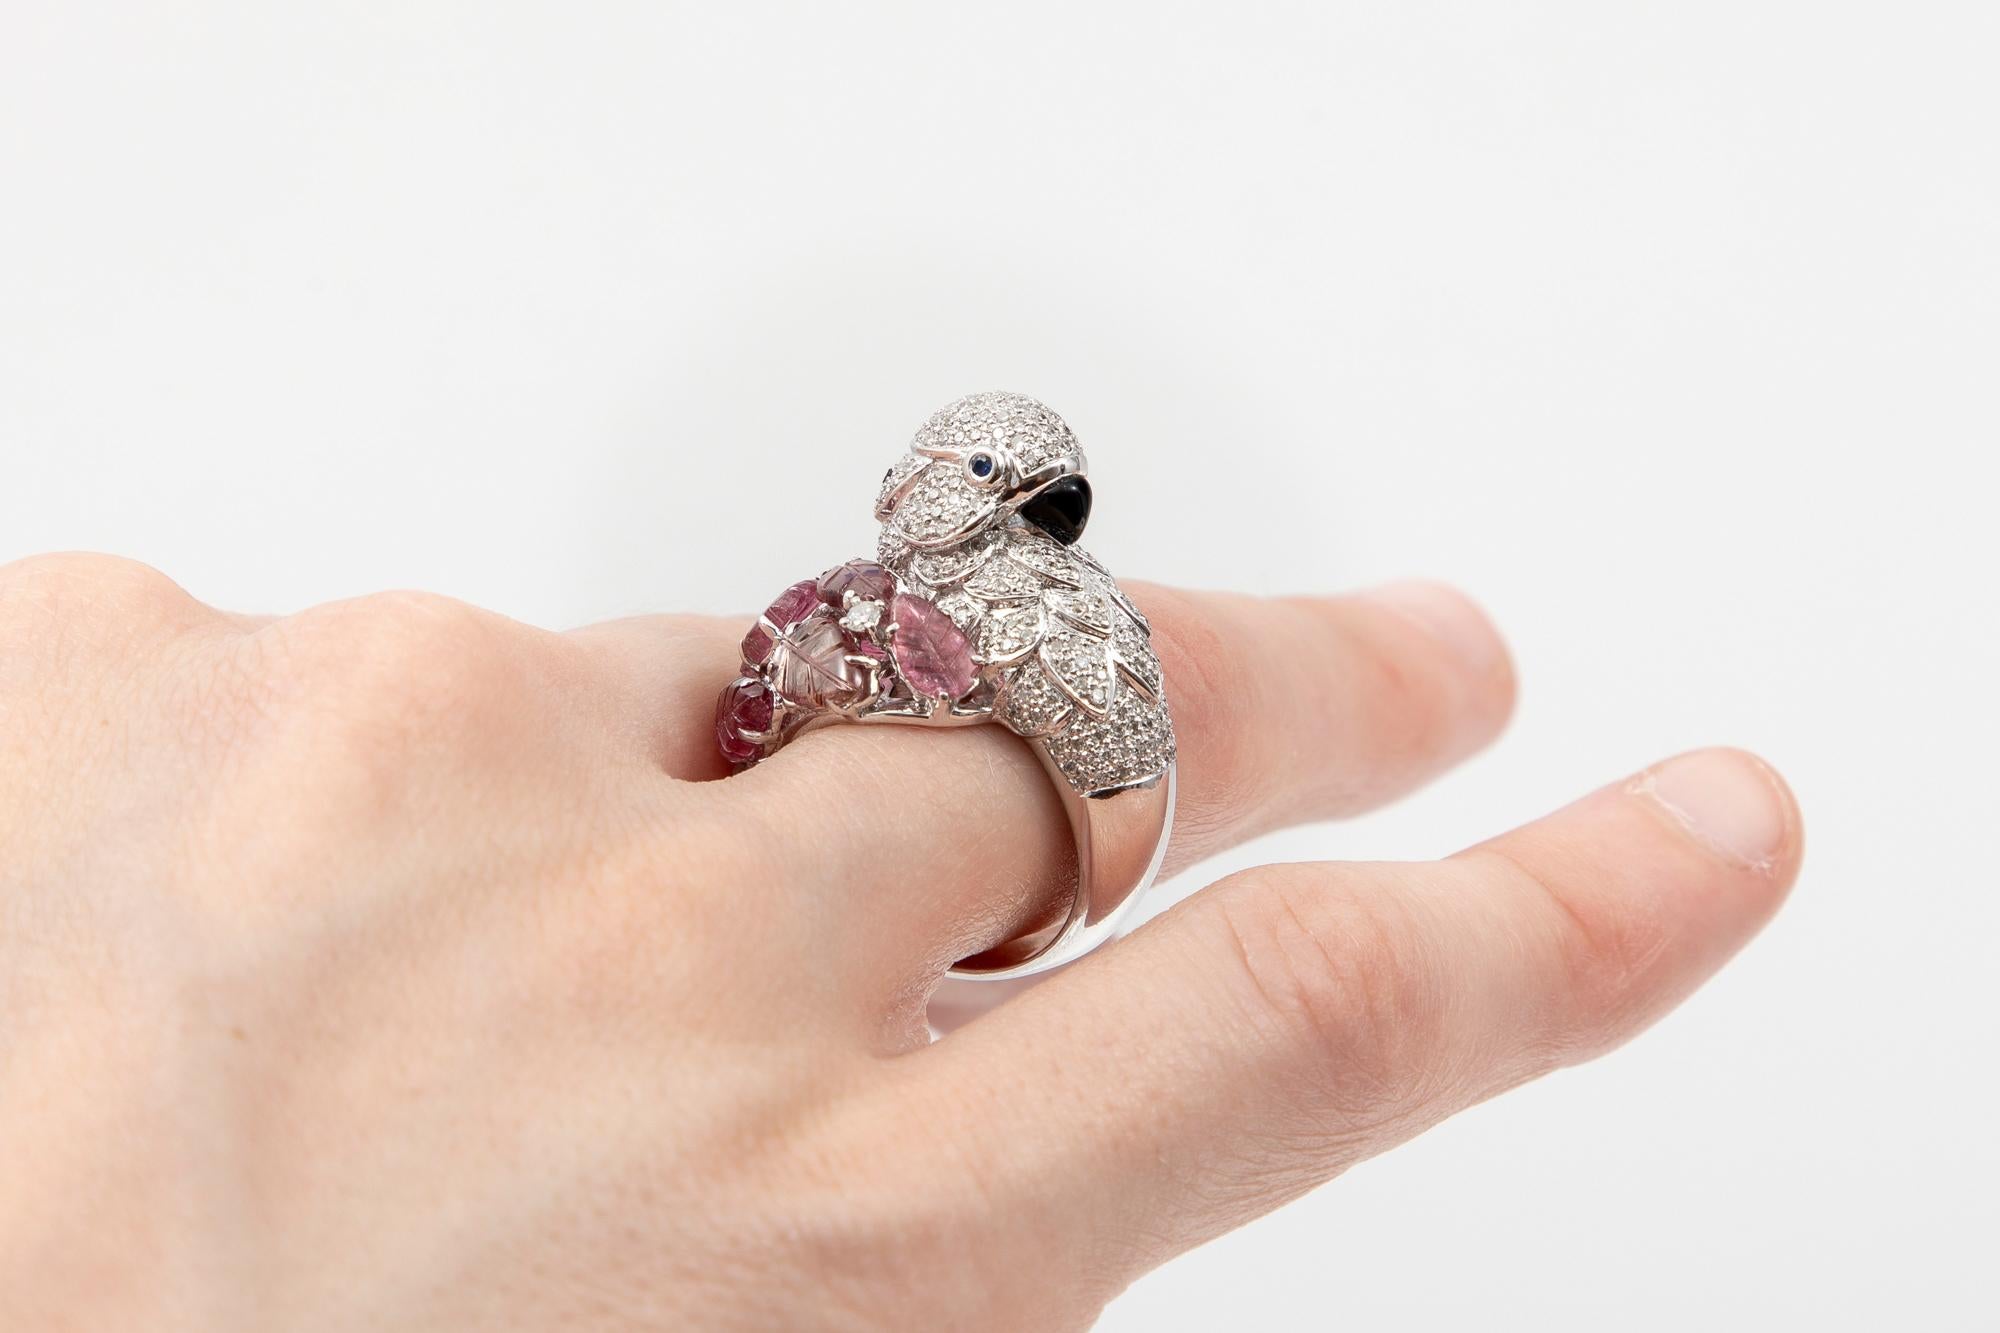 18k White Gold Pink Tourmaline And Diamond Figural Flamingo Ring For Sale 6